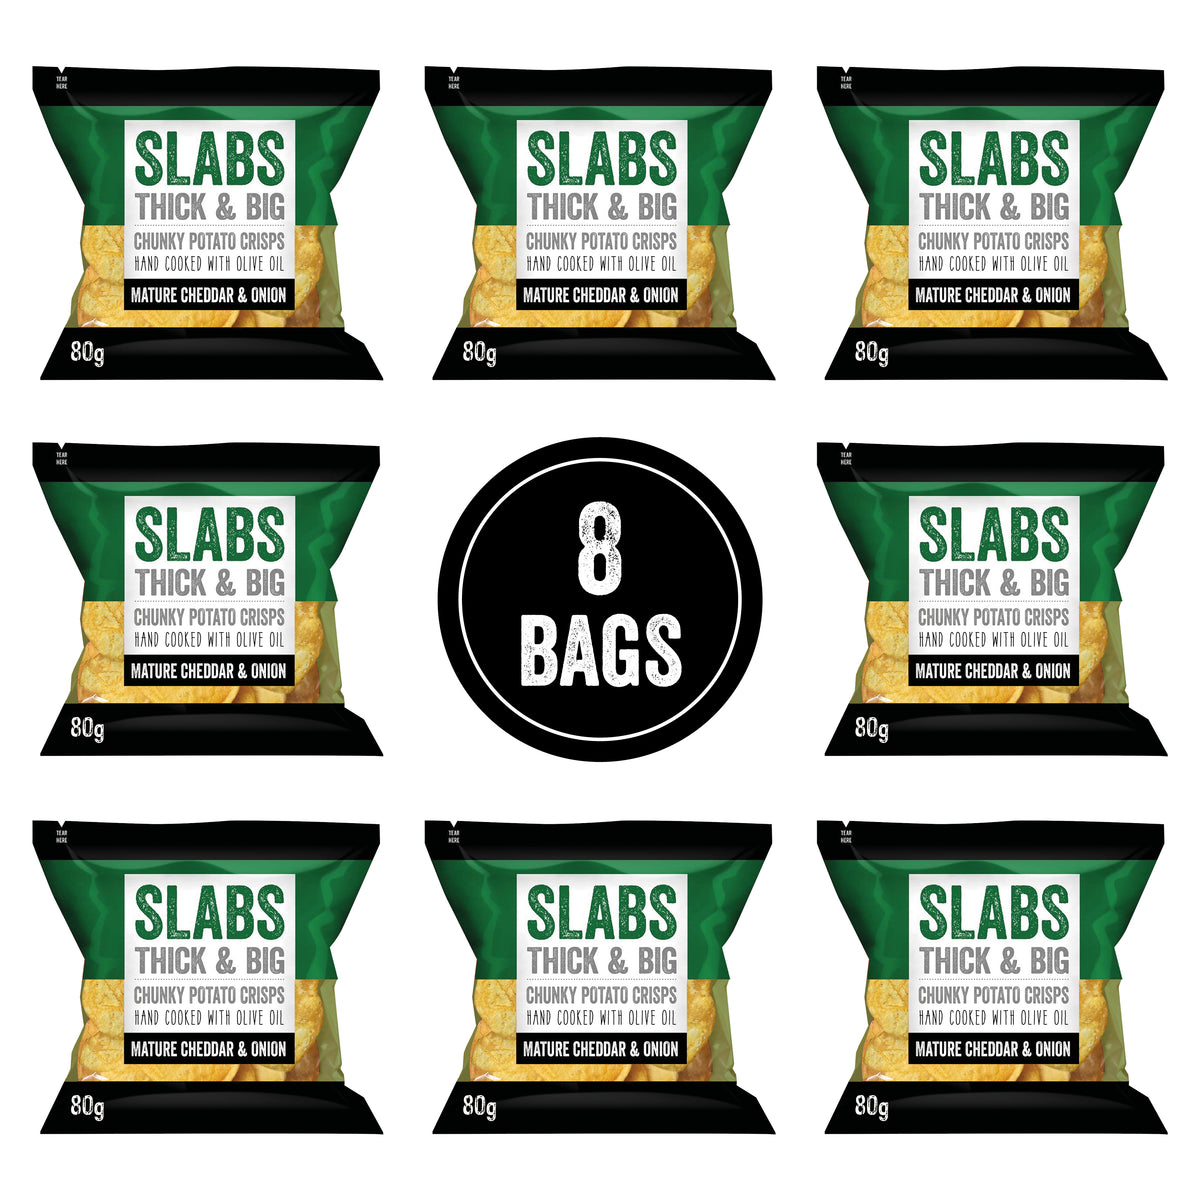 SLABS CHEESE & ONION 80g (2.8oz) box of 8 bags for a Tenner